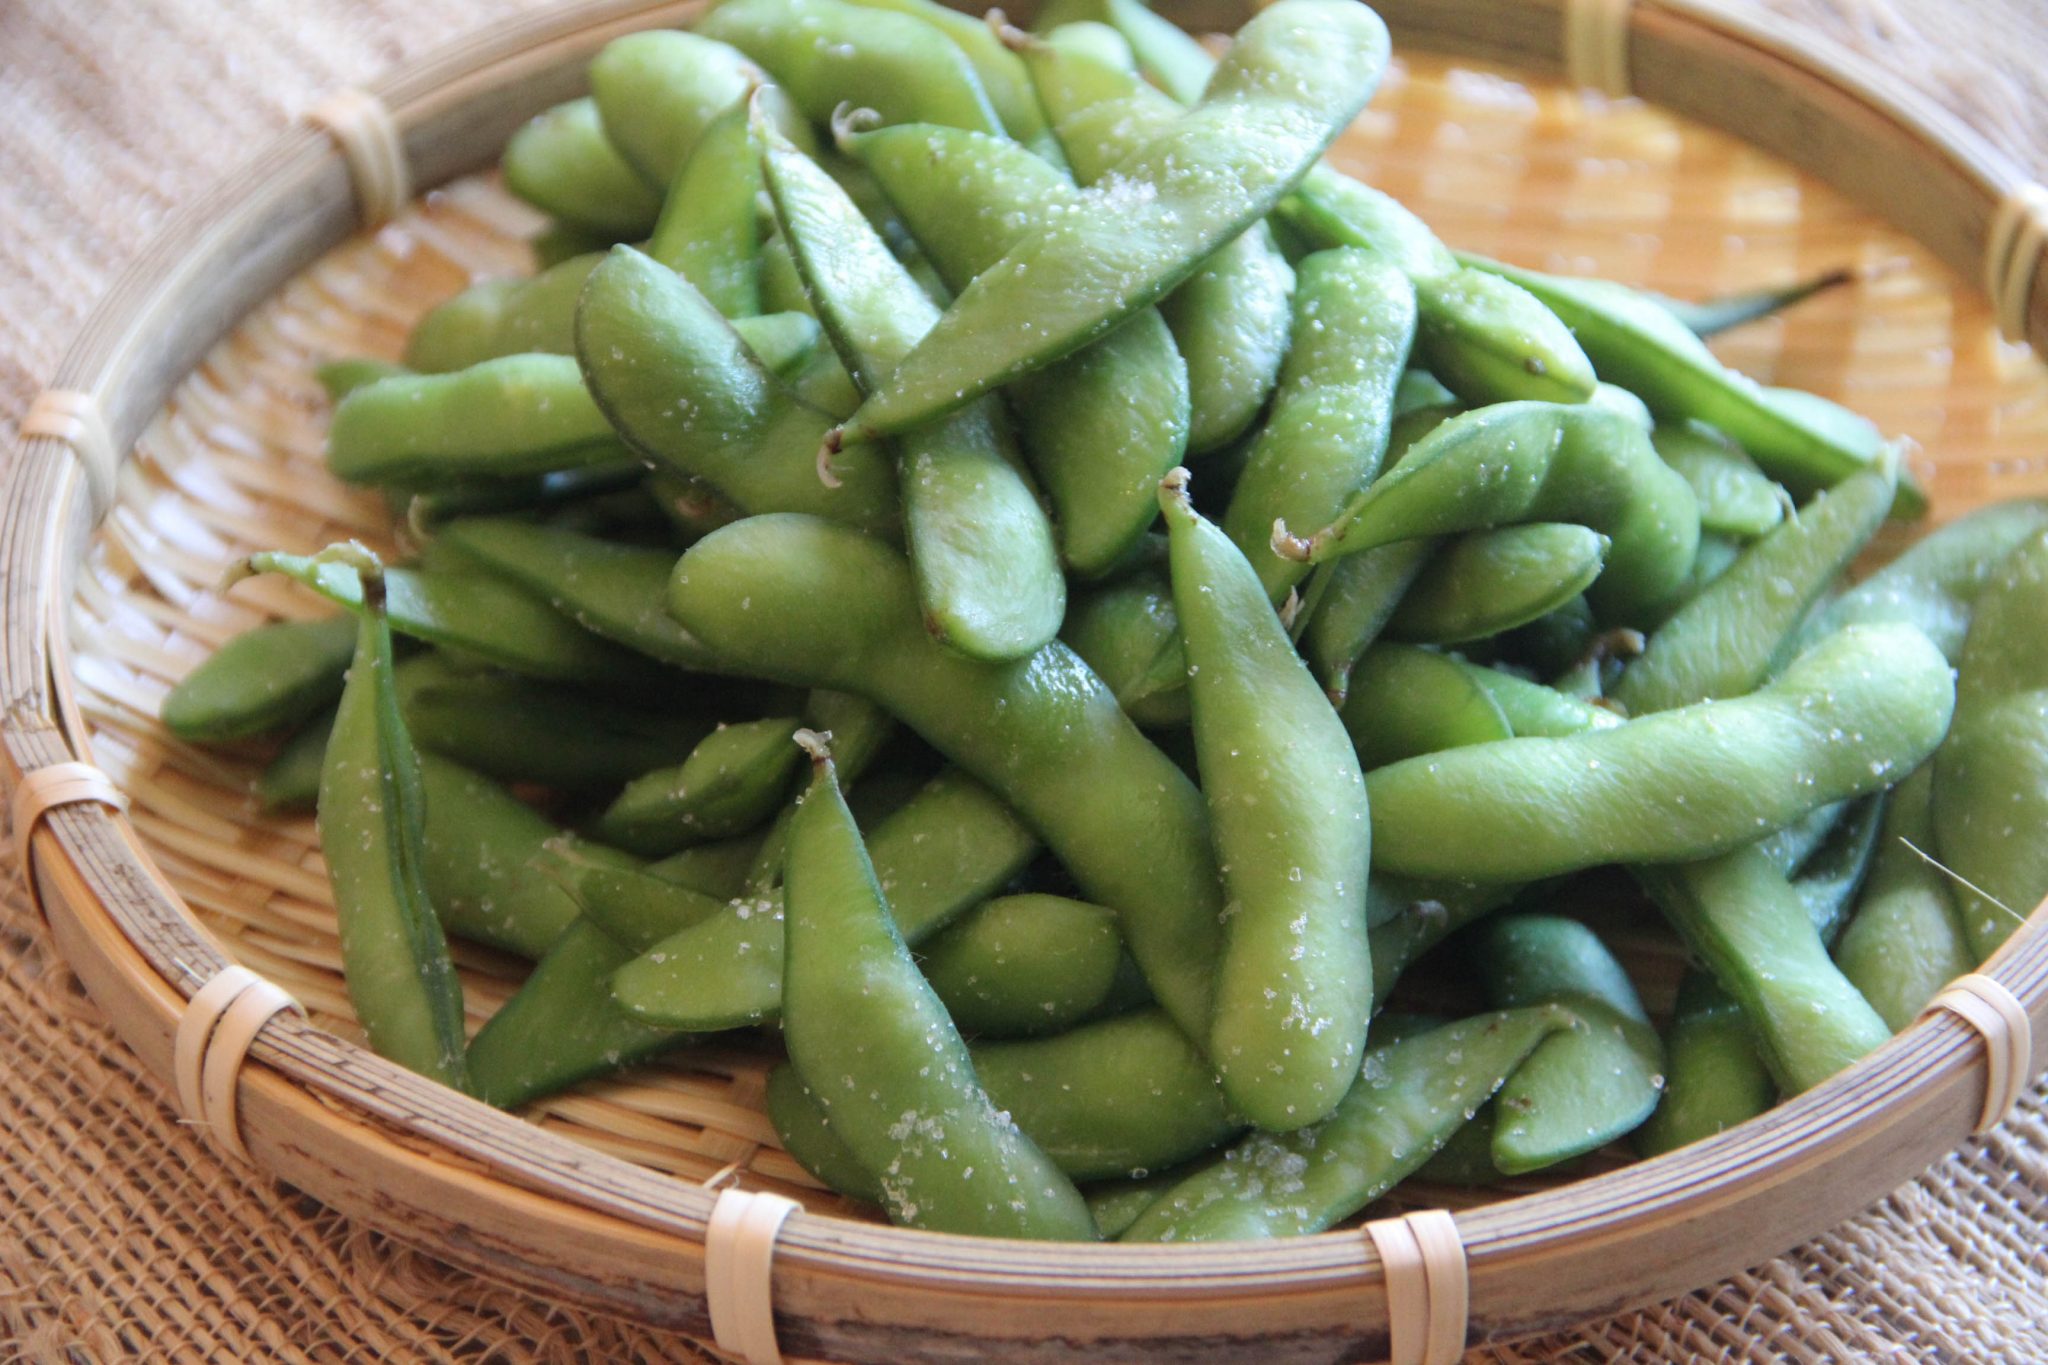 What are some recipes that contain edamame beans?